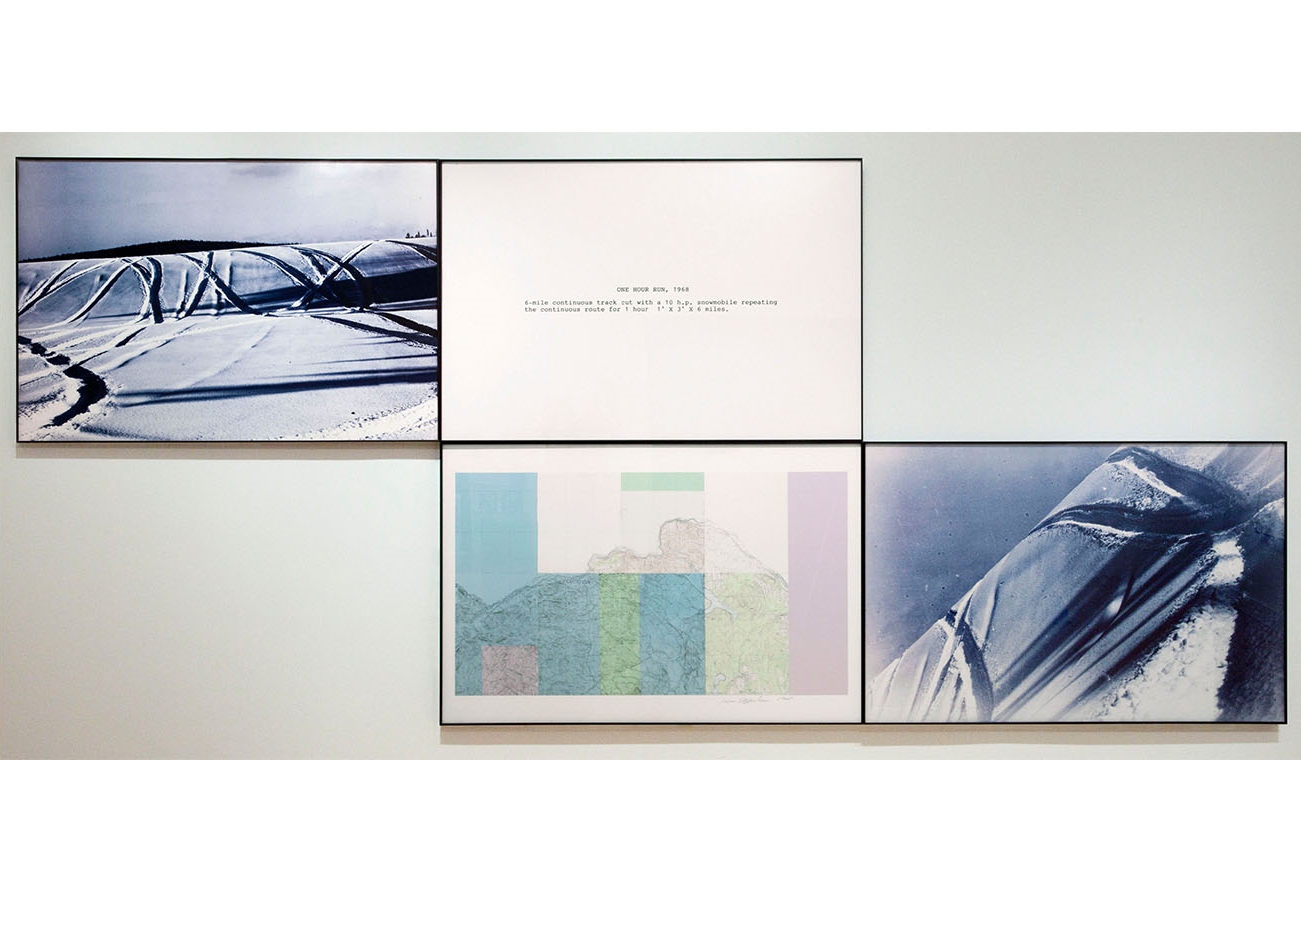  Dennis Oppenheim,  One Hour Run , 1968 Color photography, collage stamped topographic map, collage boundary line photograph |&nbsp;1 map, 1 text, 2 snow photos: each 40 x 60 inches |&nbsp;HG6437 